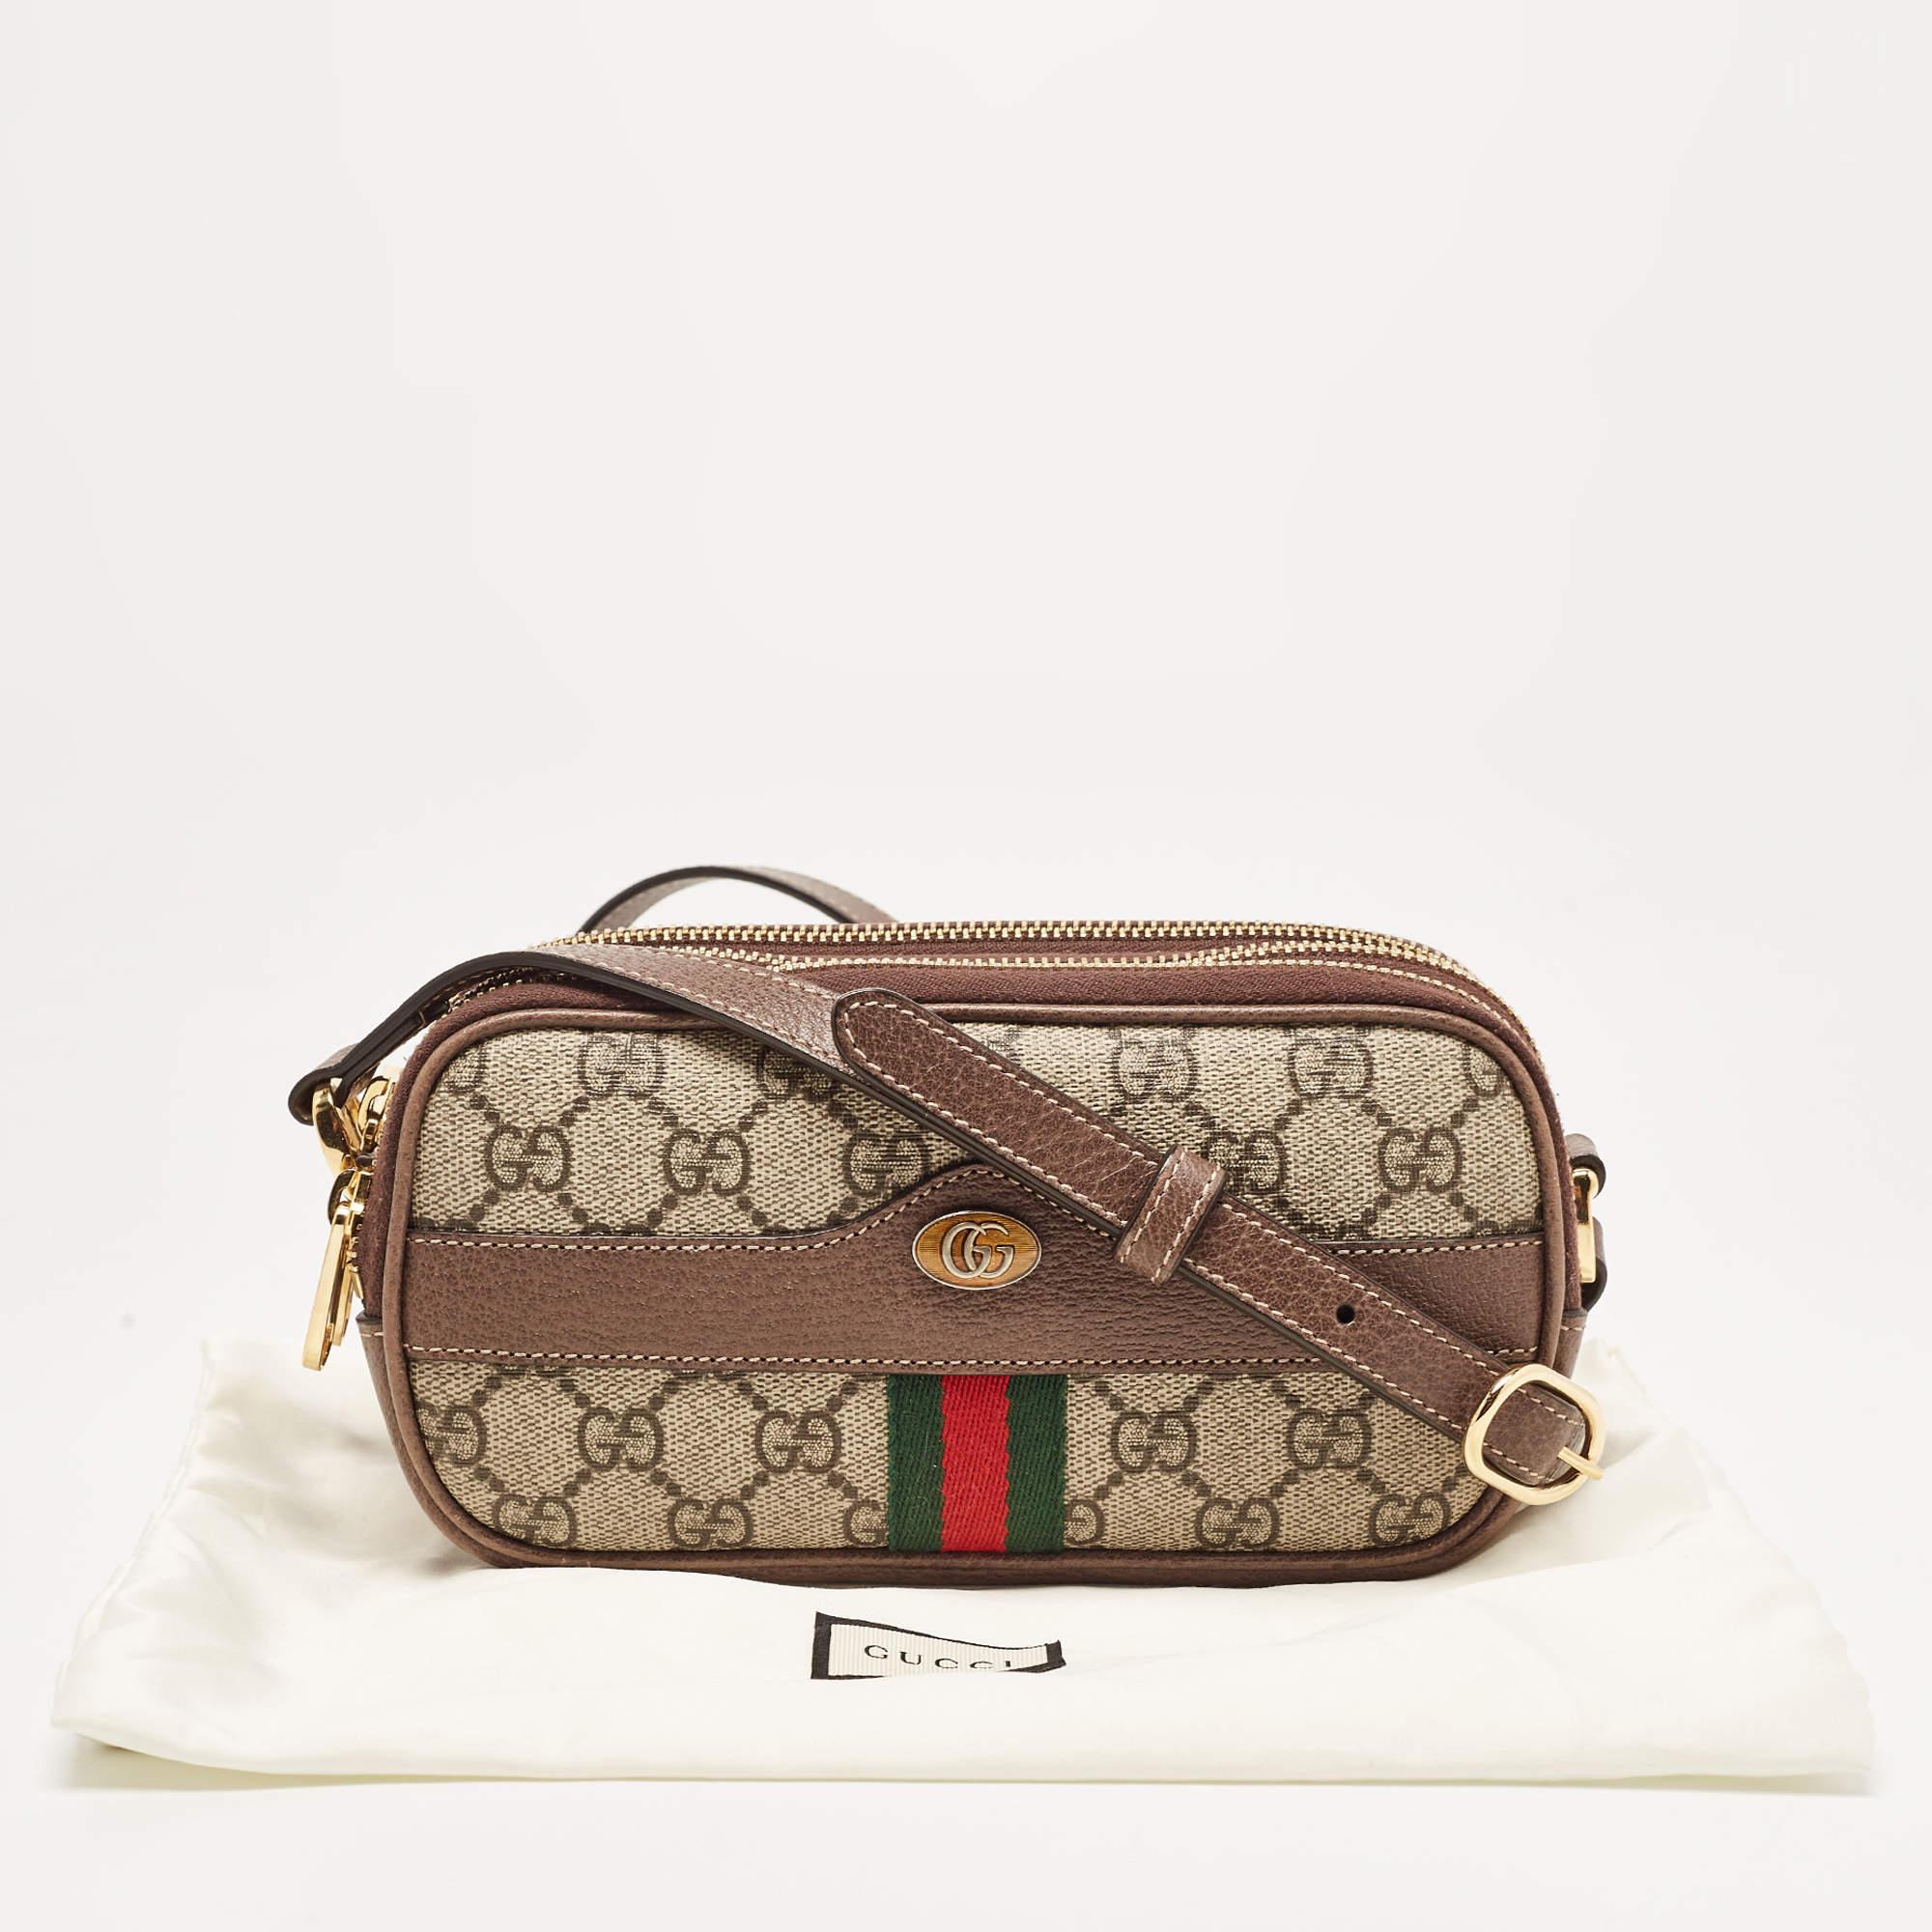 Gucci Beige/Brown GG Supreme Canvas and Leather Ophidia Crossbody Bag 7